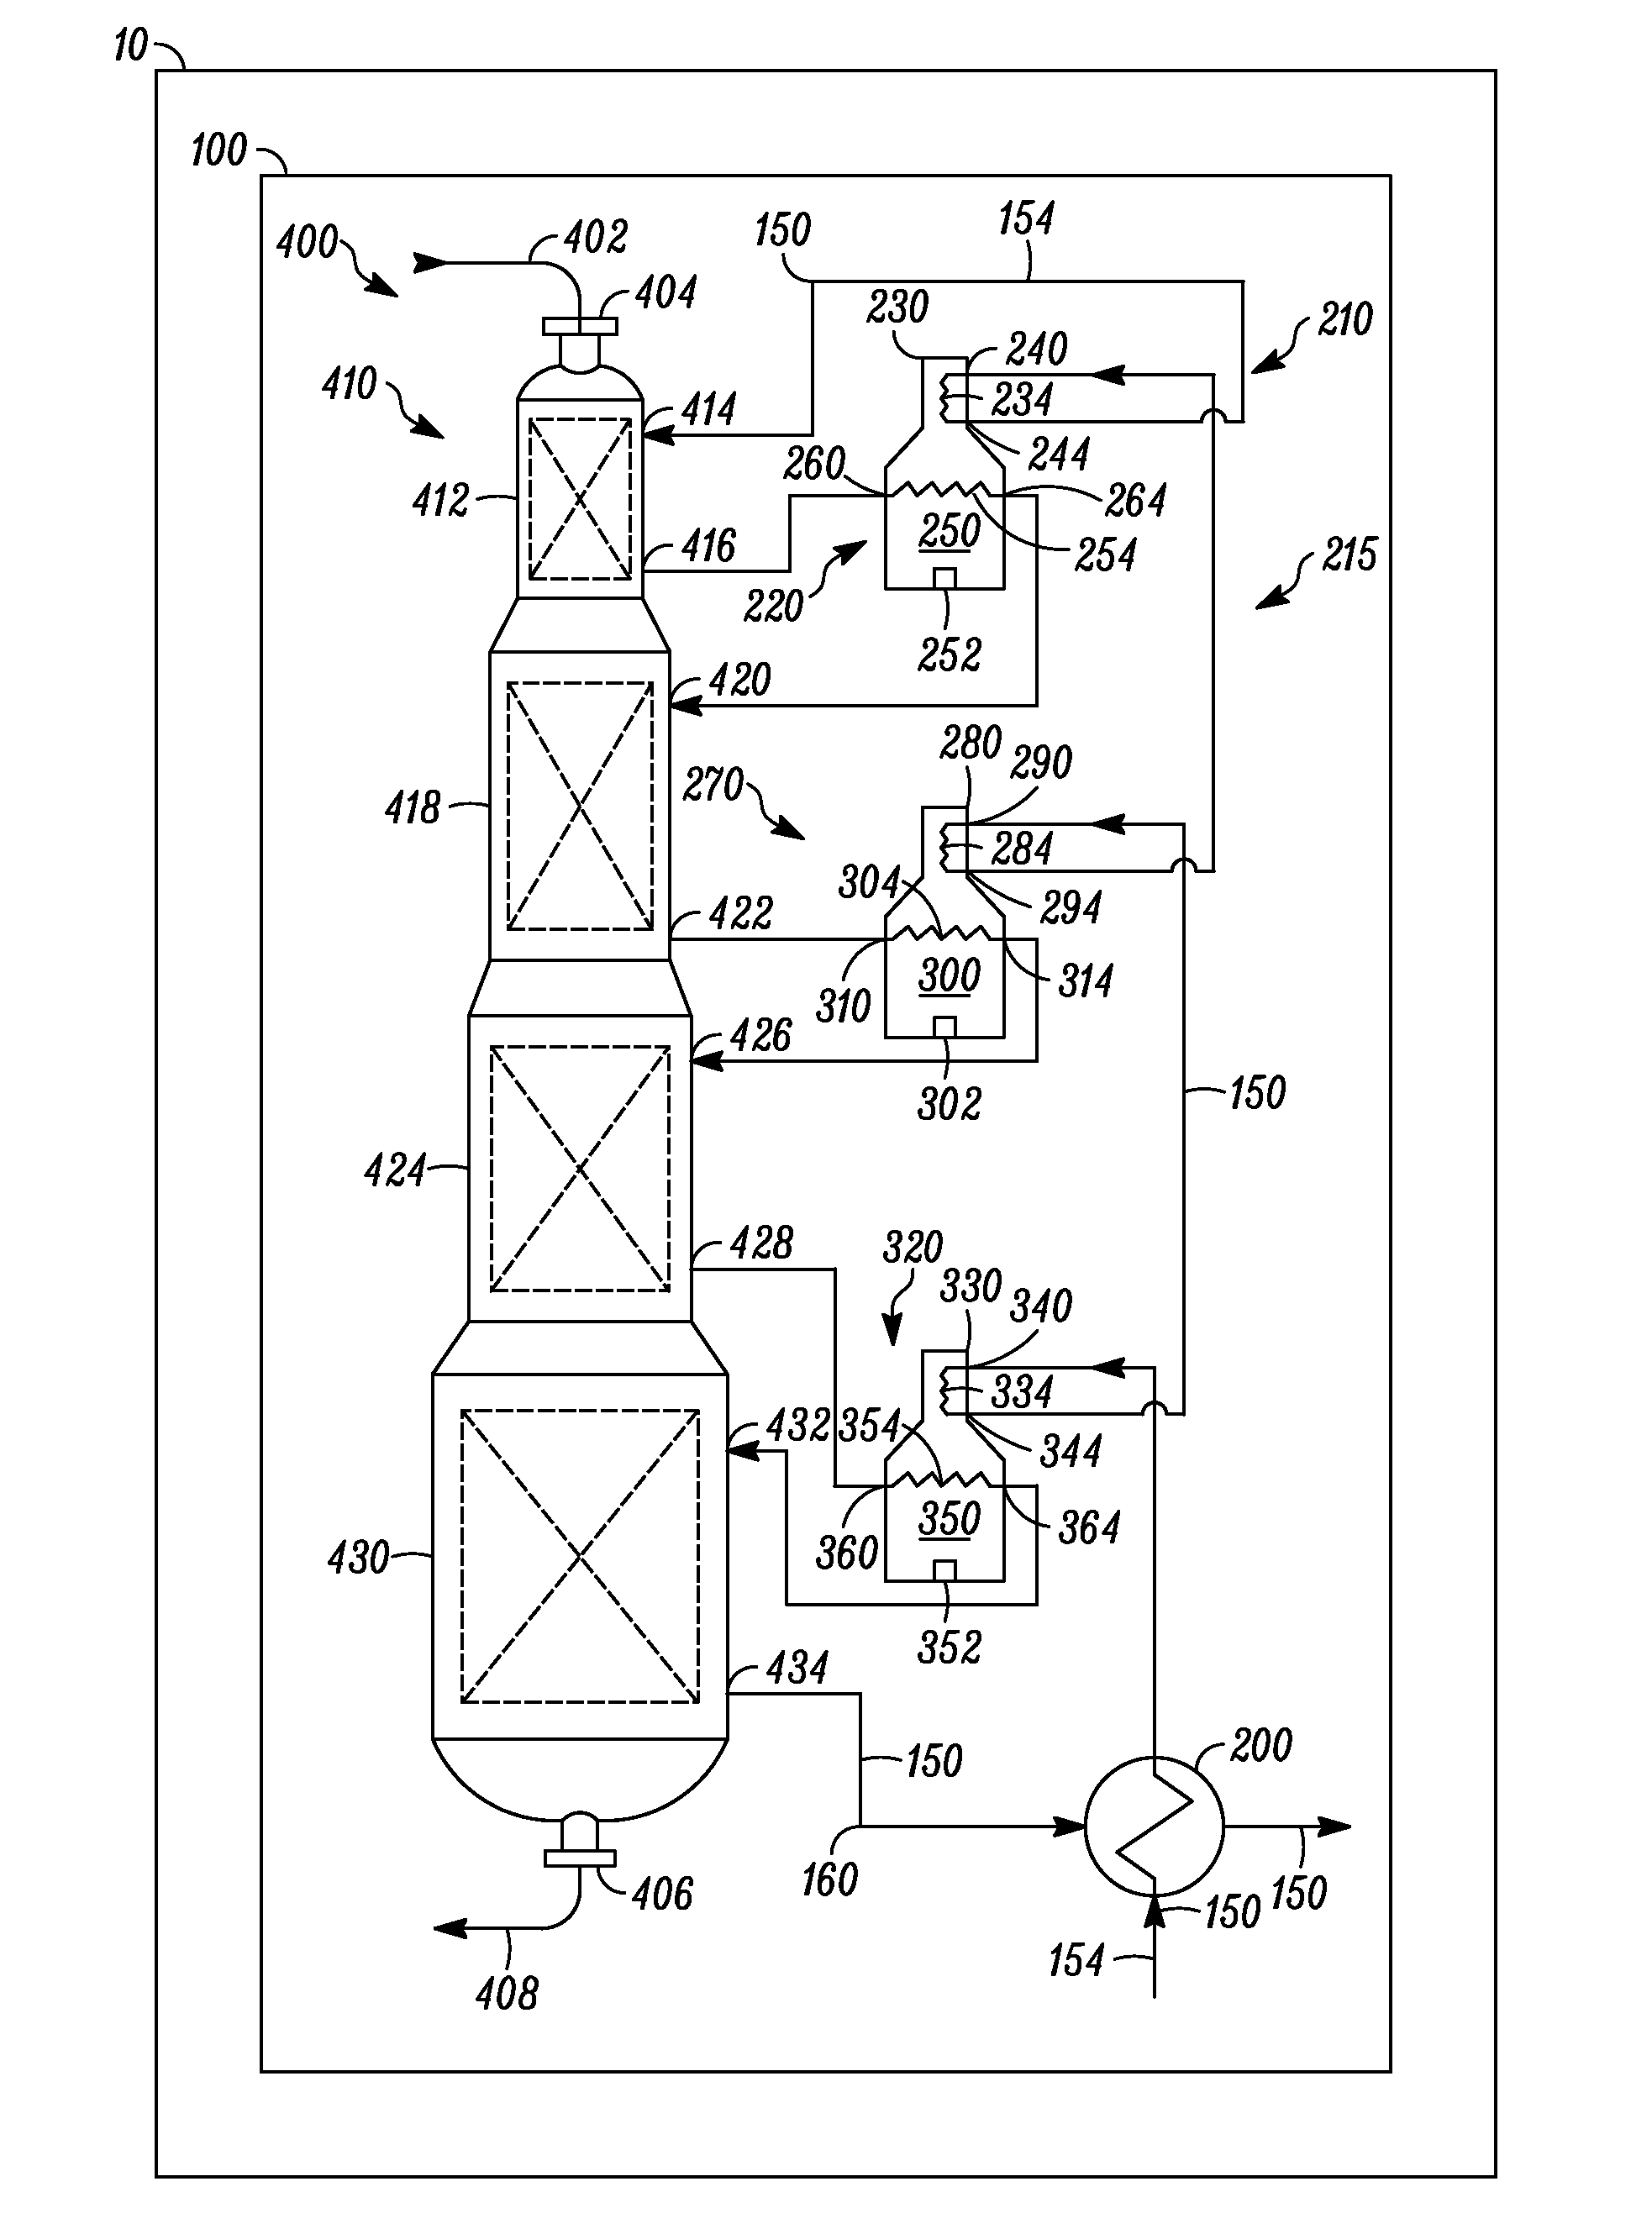 Process For Heating A Hydrocarbon Stream Entering A Reaction Zone With A Heater Convection Section